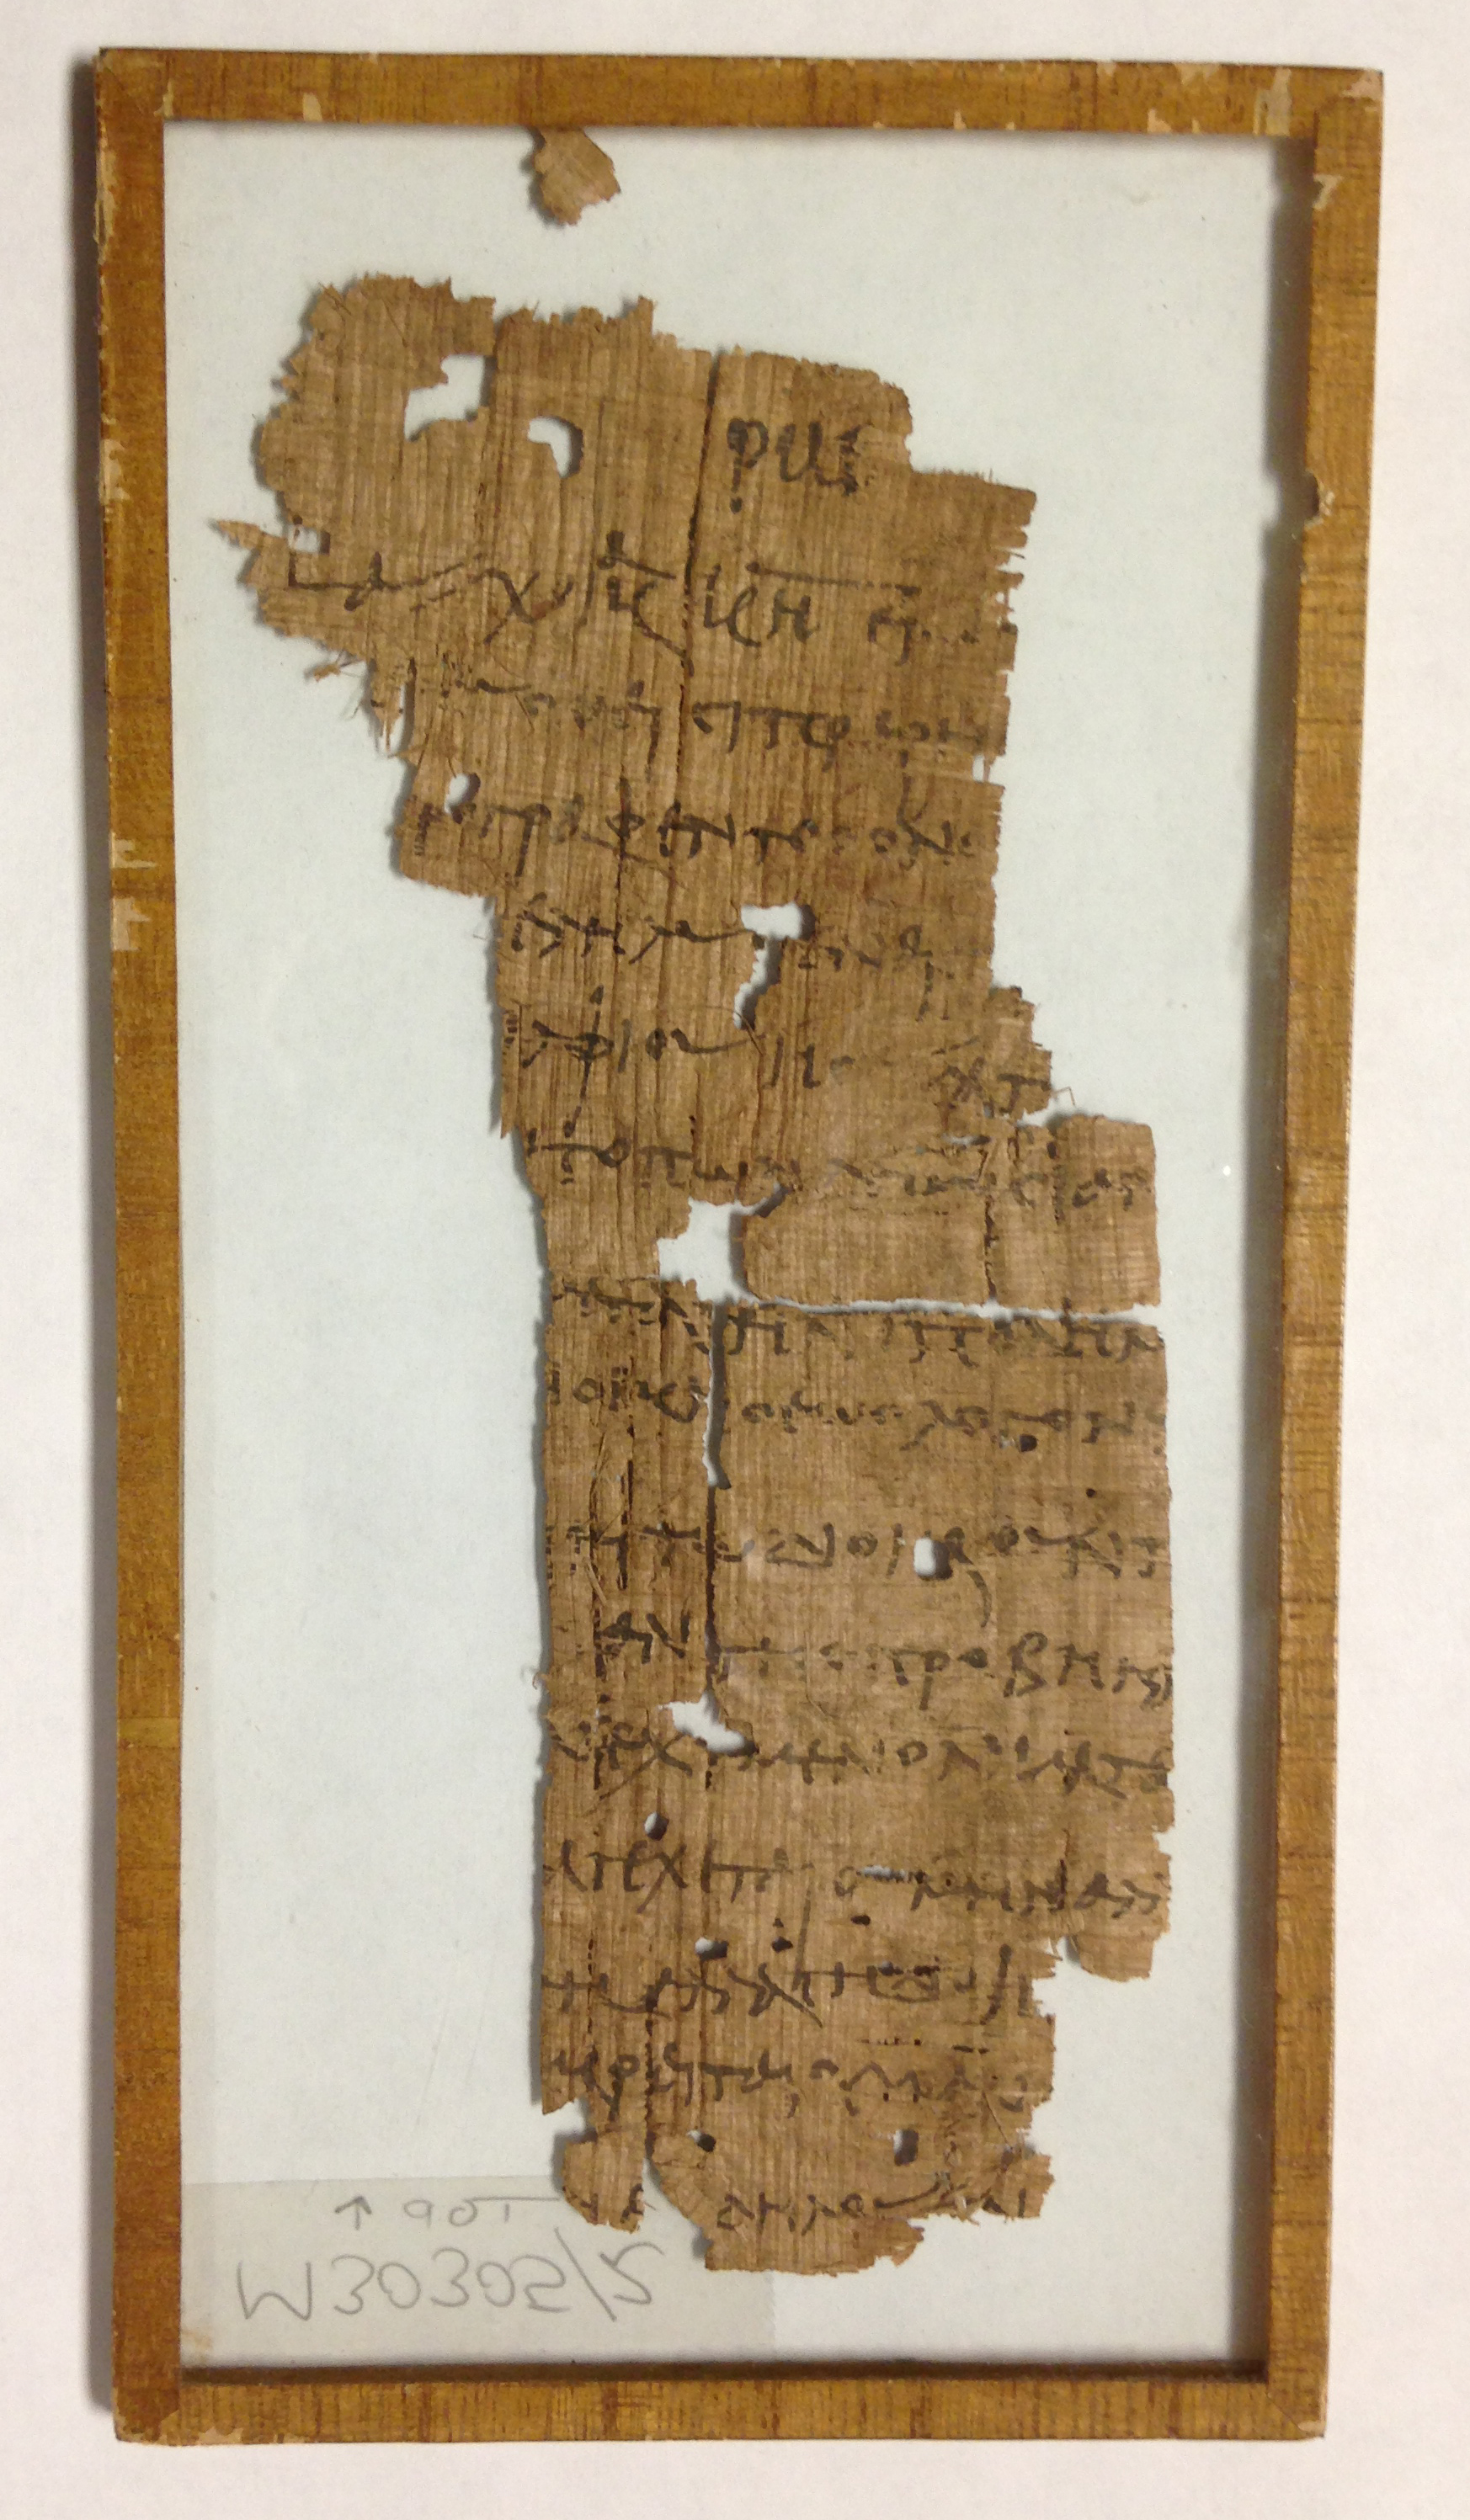 Piece of papyrus torn from the first papyrus document